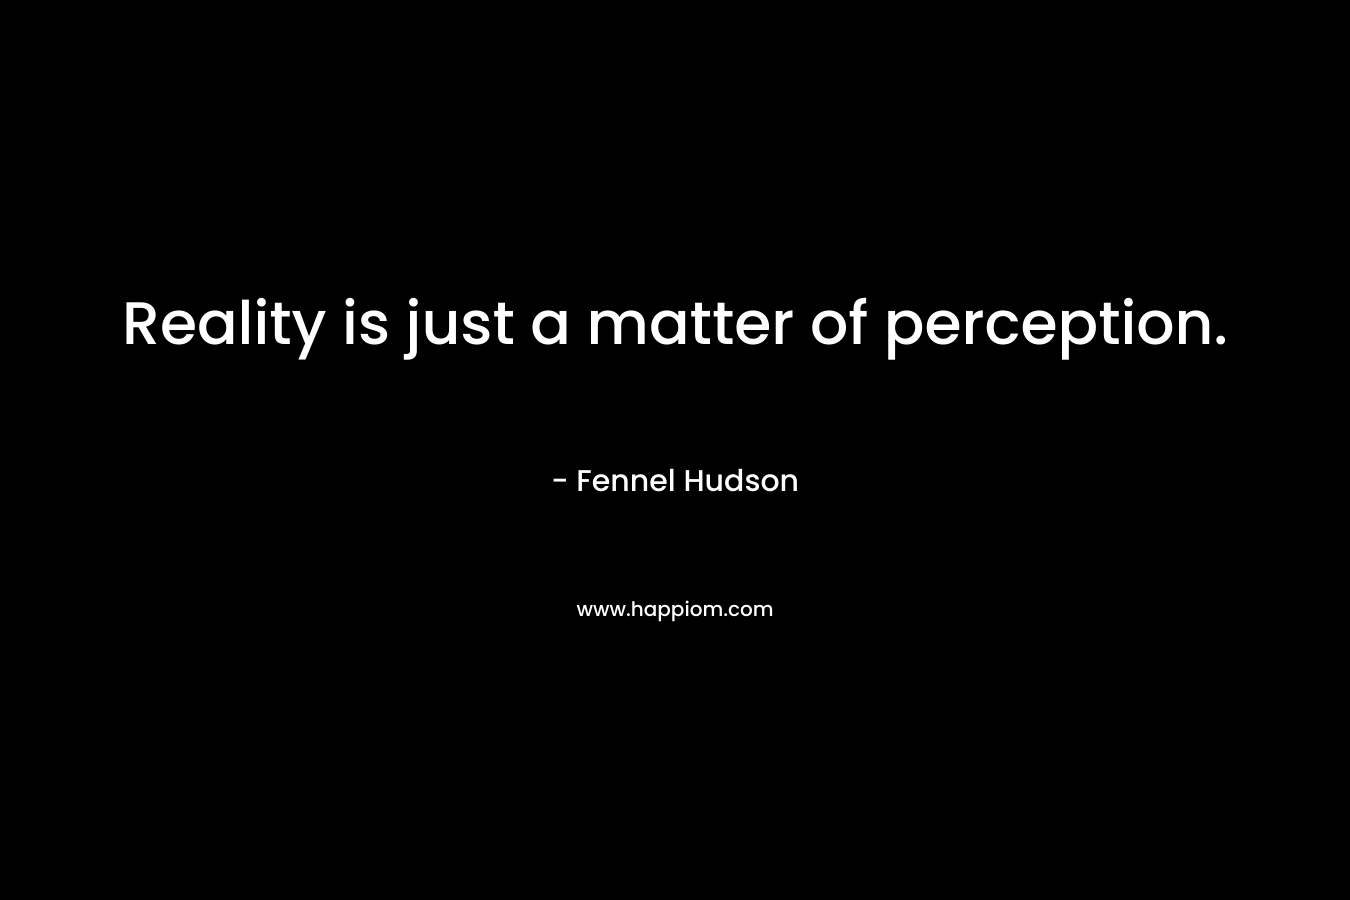 Reality is just a matter of perception.